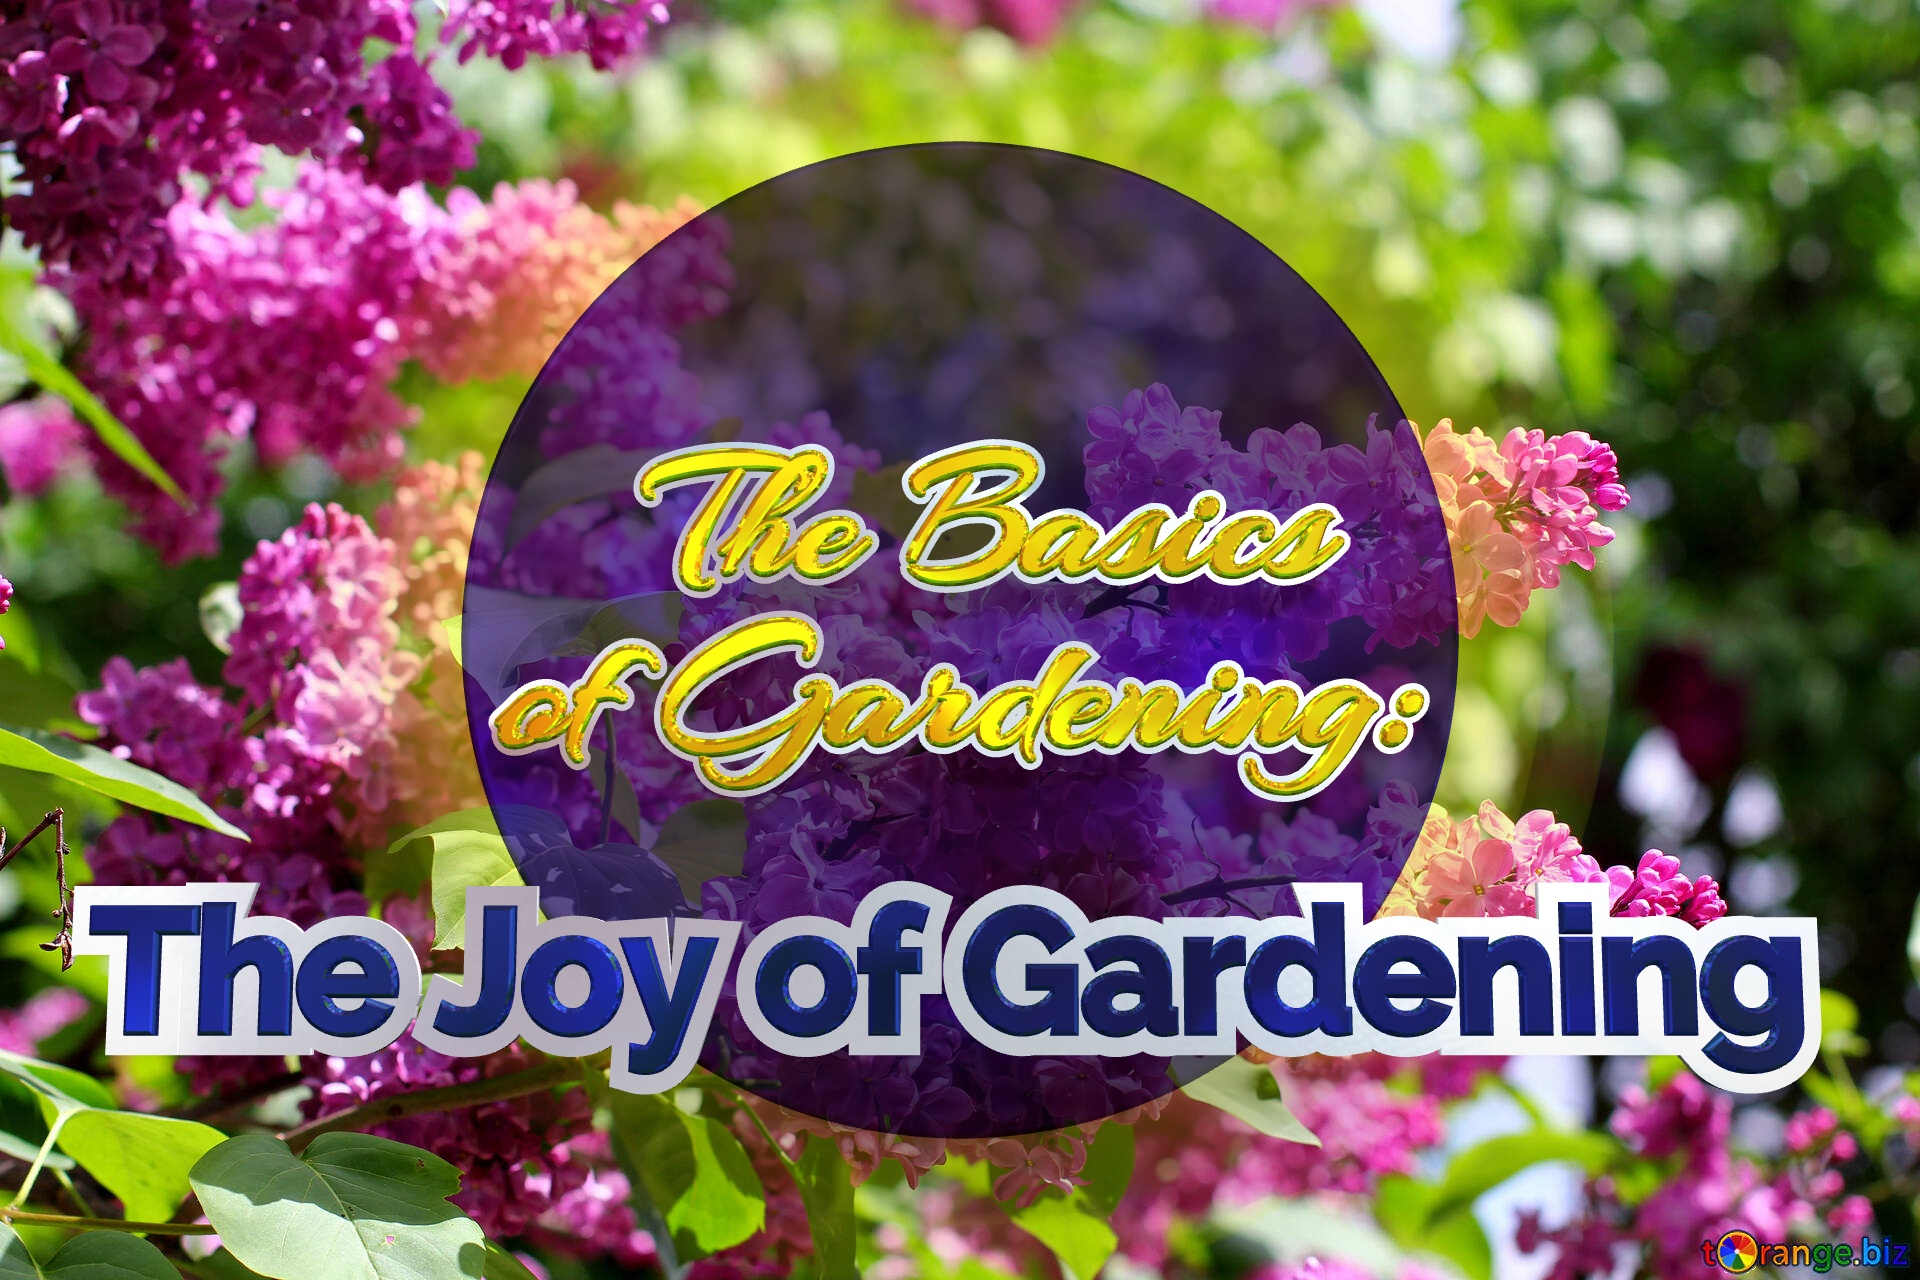    The Basics  of Gardening:   The Joy of Gardening  Bright picture with lilac flowers №37487